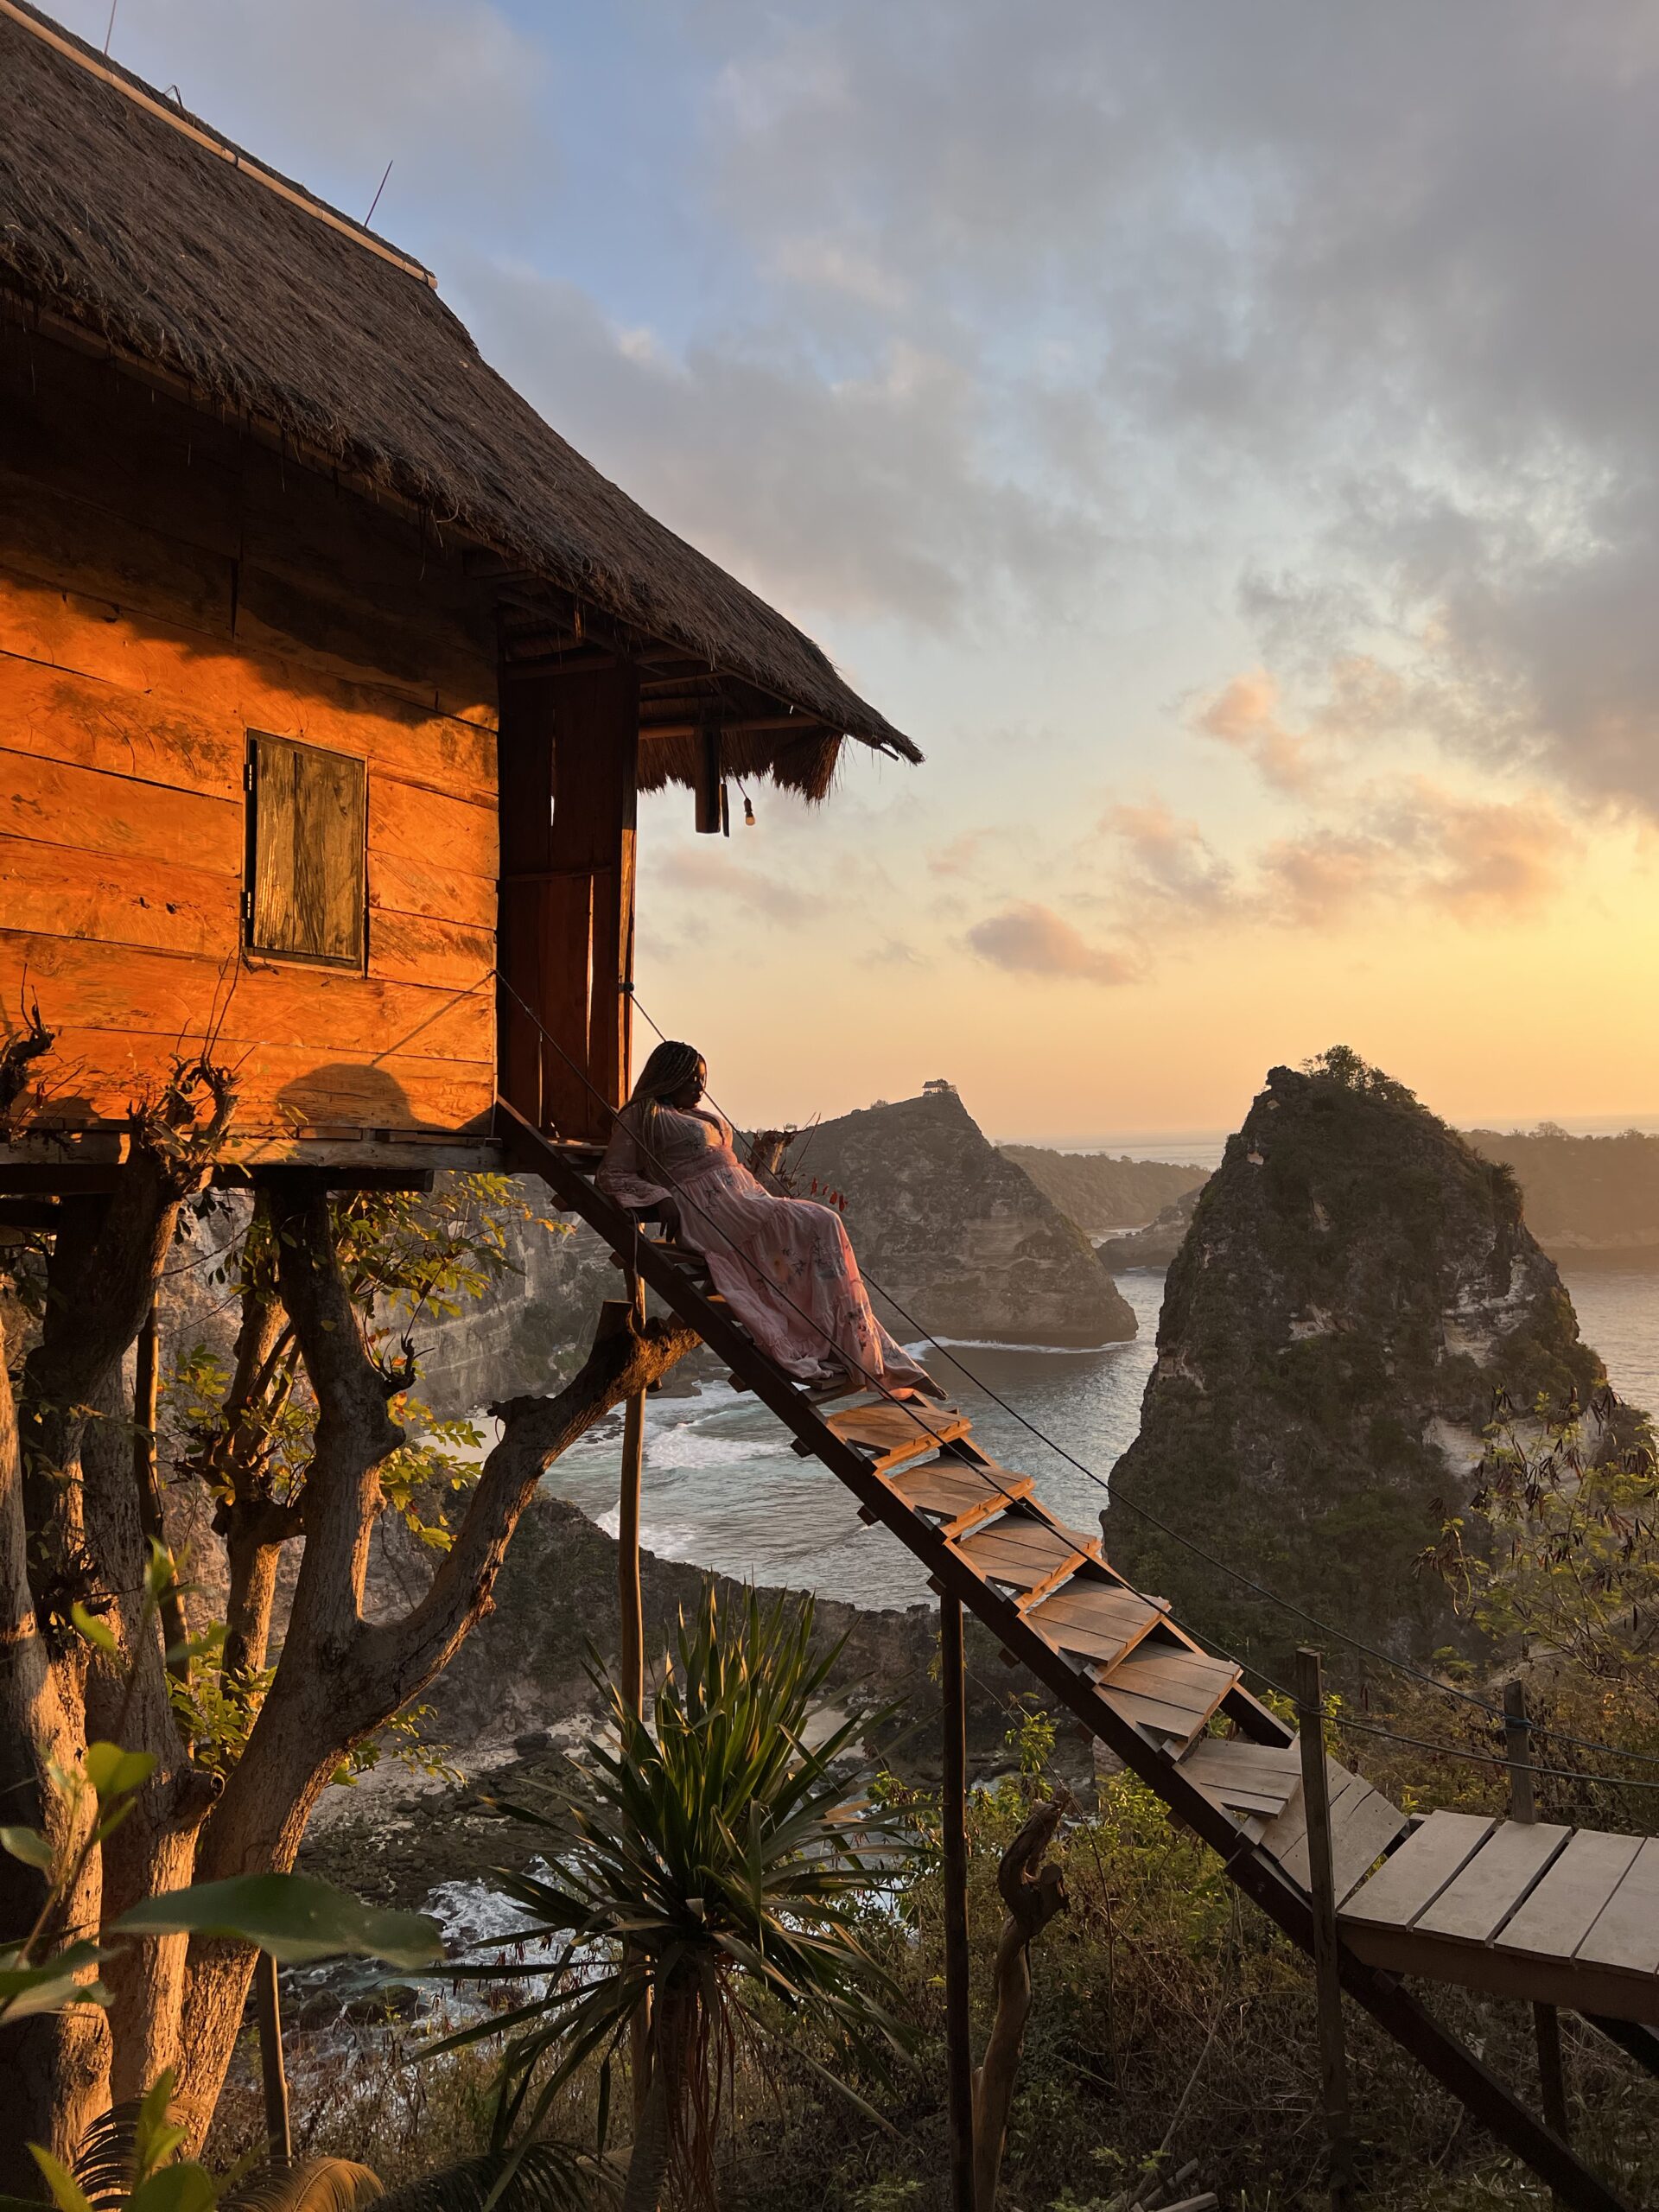 black woman in pink maxi dress sitting on stairs of tree house with a view of the sea. Photo was taken at sunrise and the sky is a bit blue and orange.